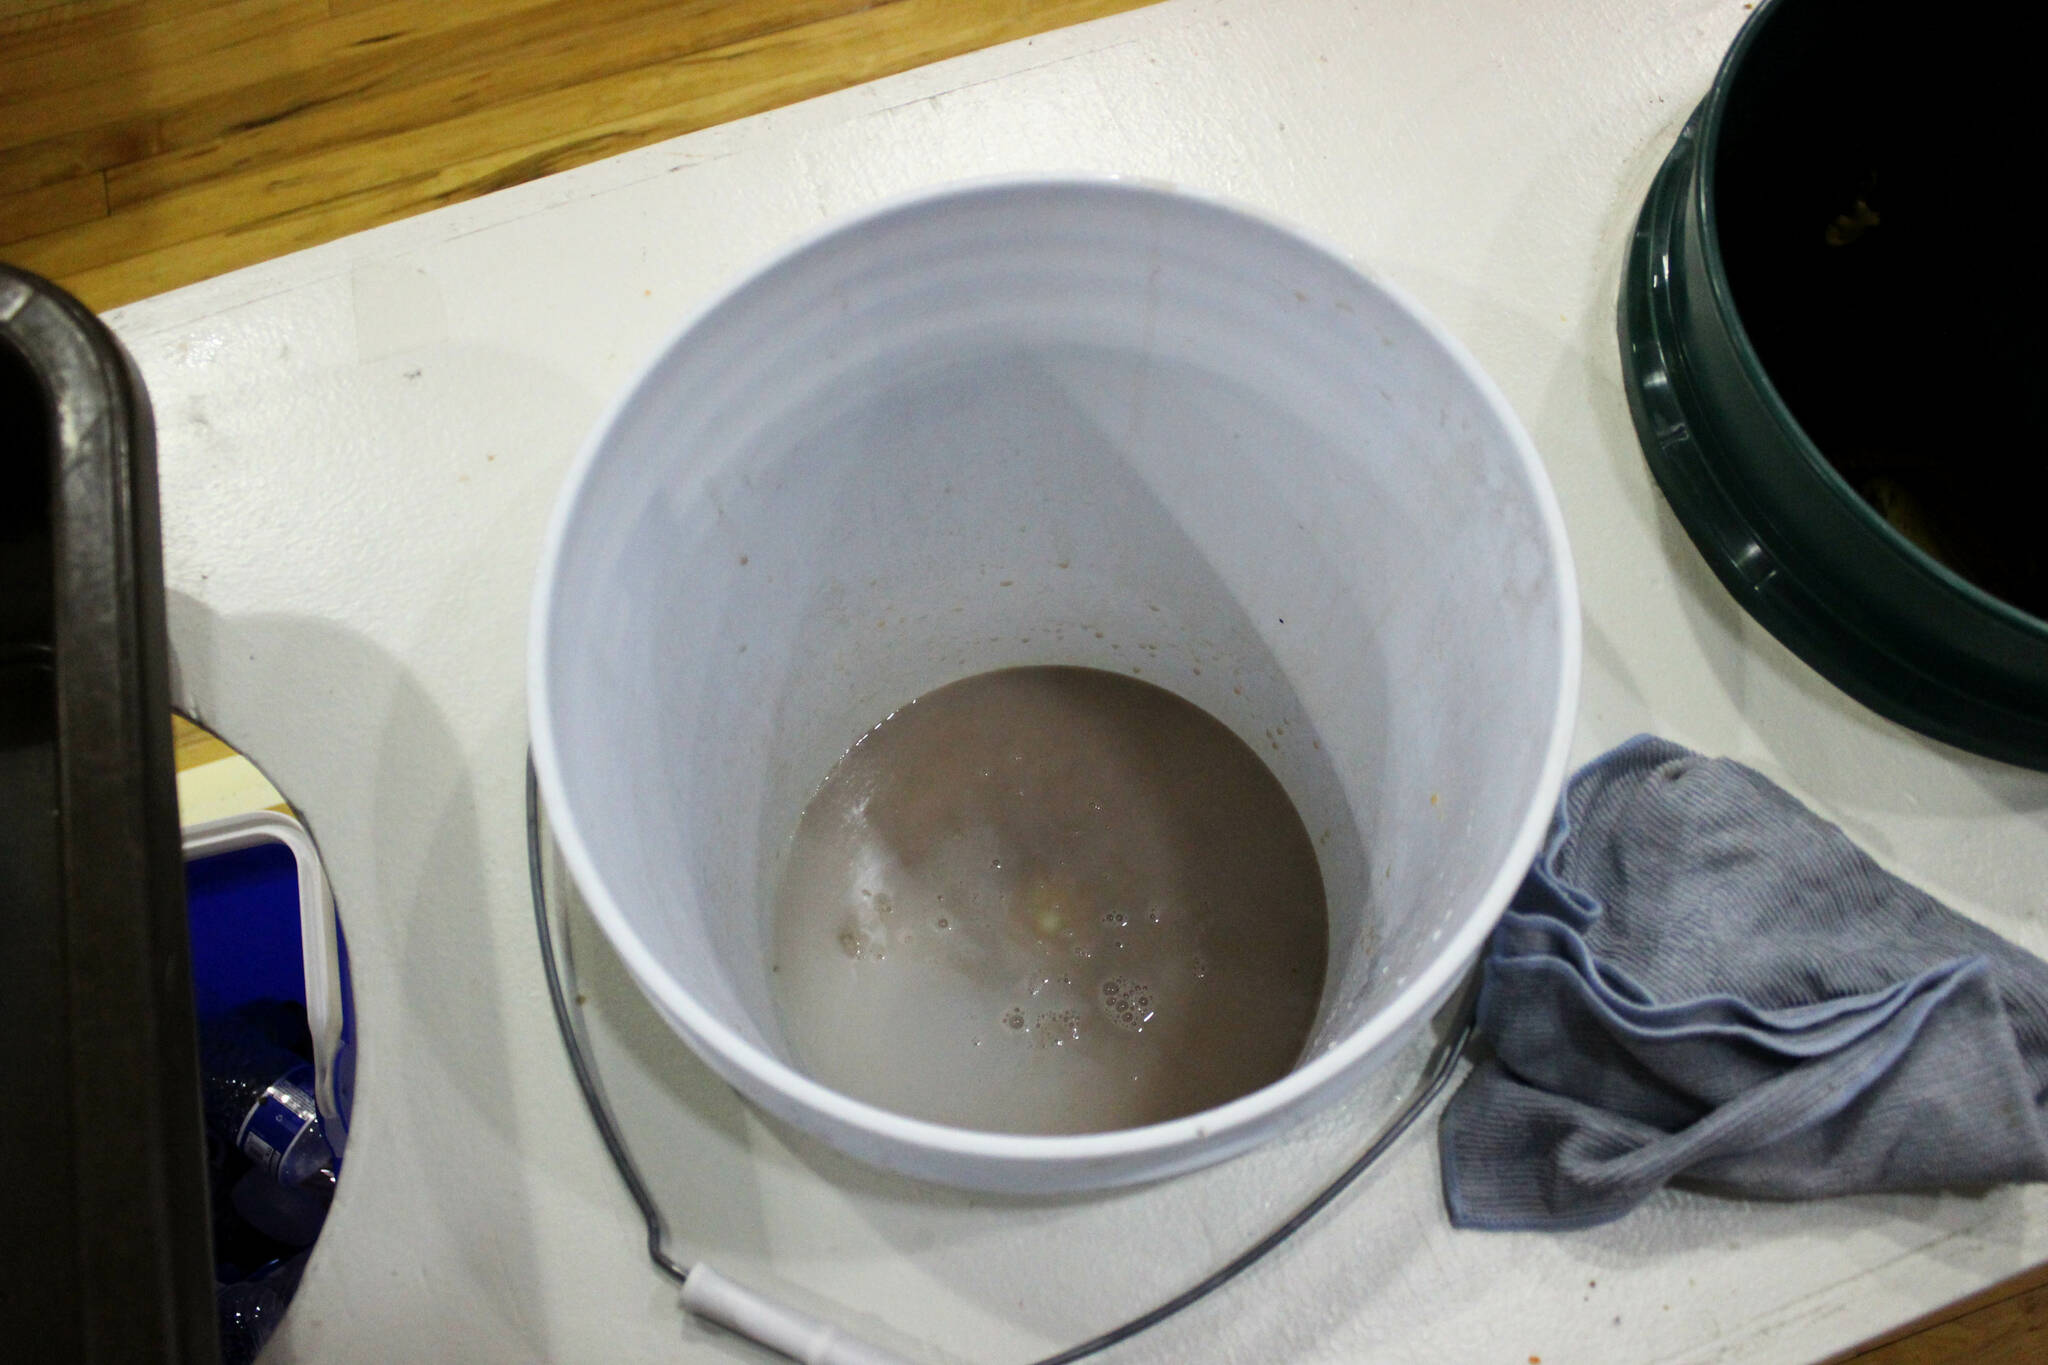 A bucket collects chocolate milk and other liquids in the cafeteria at Sterling Elementary School on Thursday, Nov. 10, 2022 in Sterling, Alaska. (Ashlyn O’Hara/Peninsula Clarion)